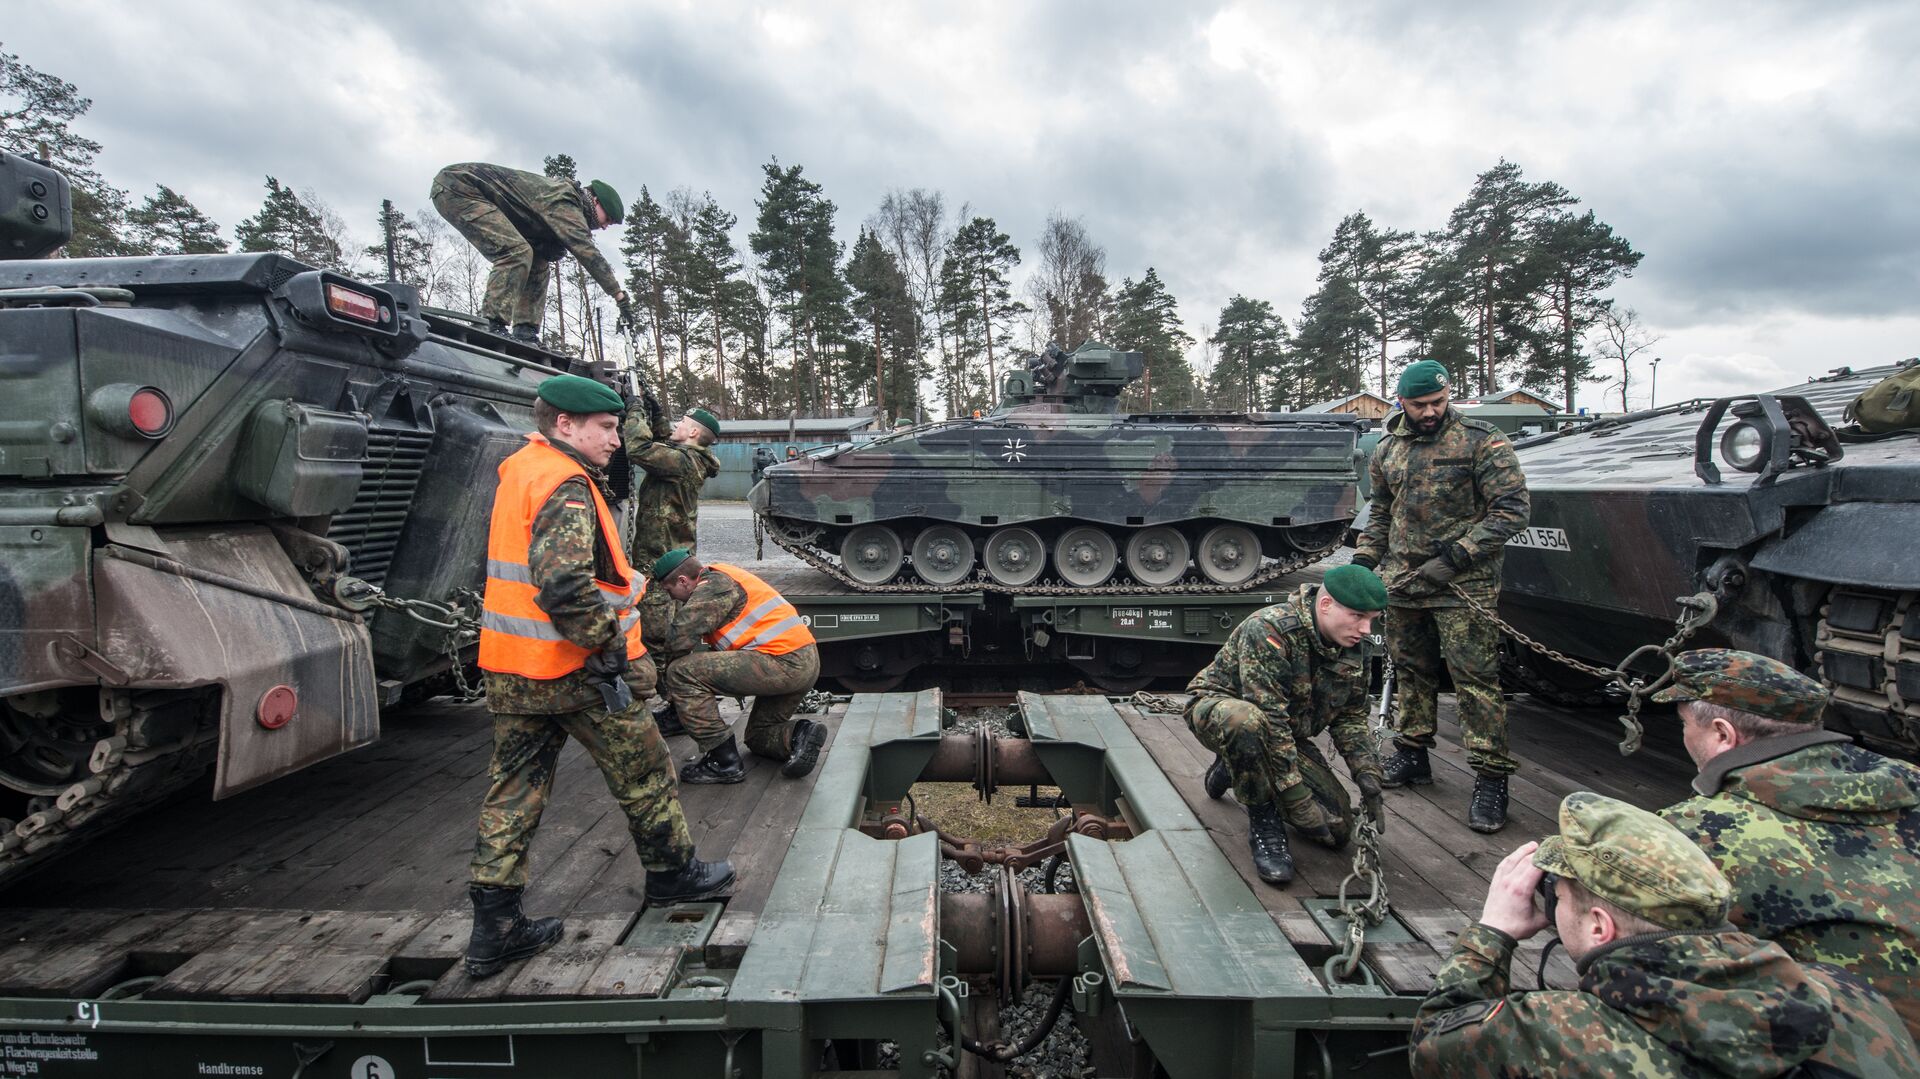 German soldiers load armored vehicles of the type Marder on a train at the troop exercise area in Grafenwoehr, southern Germany, on February 21, 2017. - Sputnik International, 1920, 21.06.2022